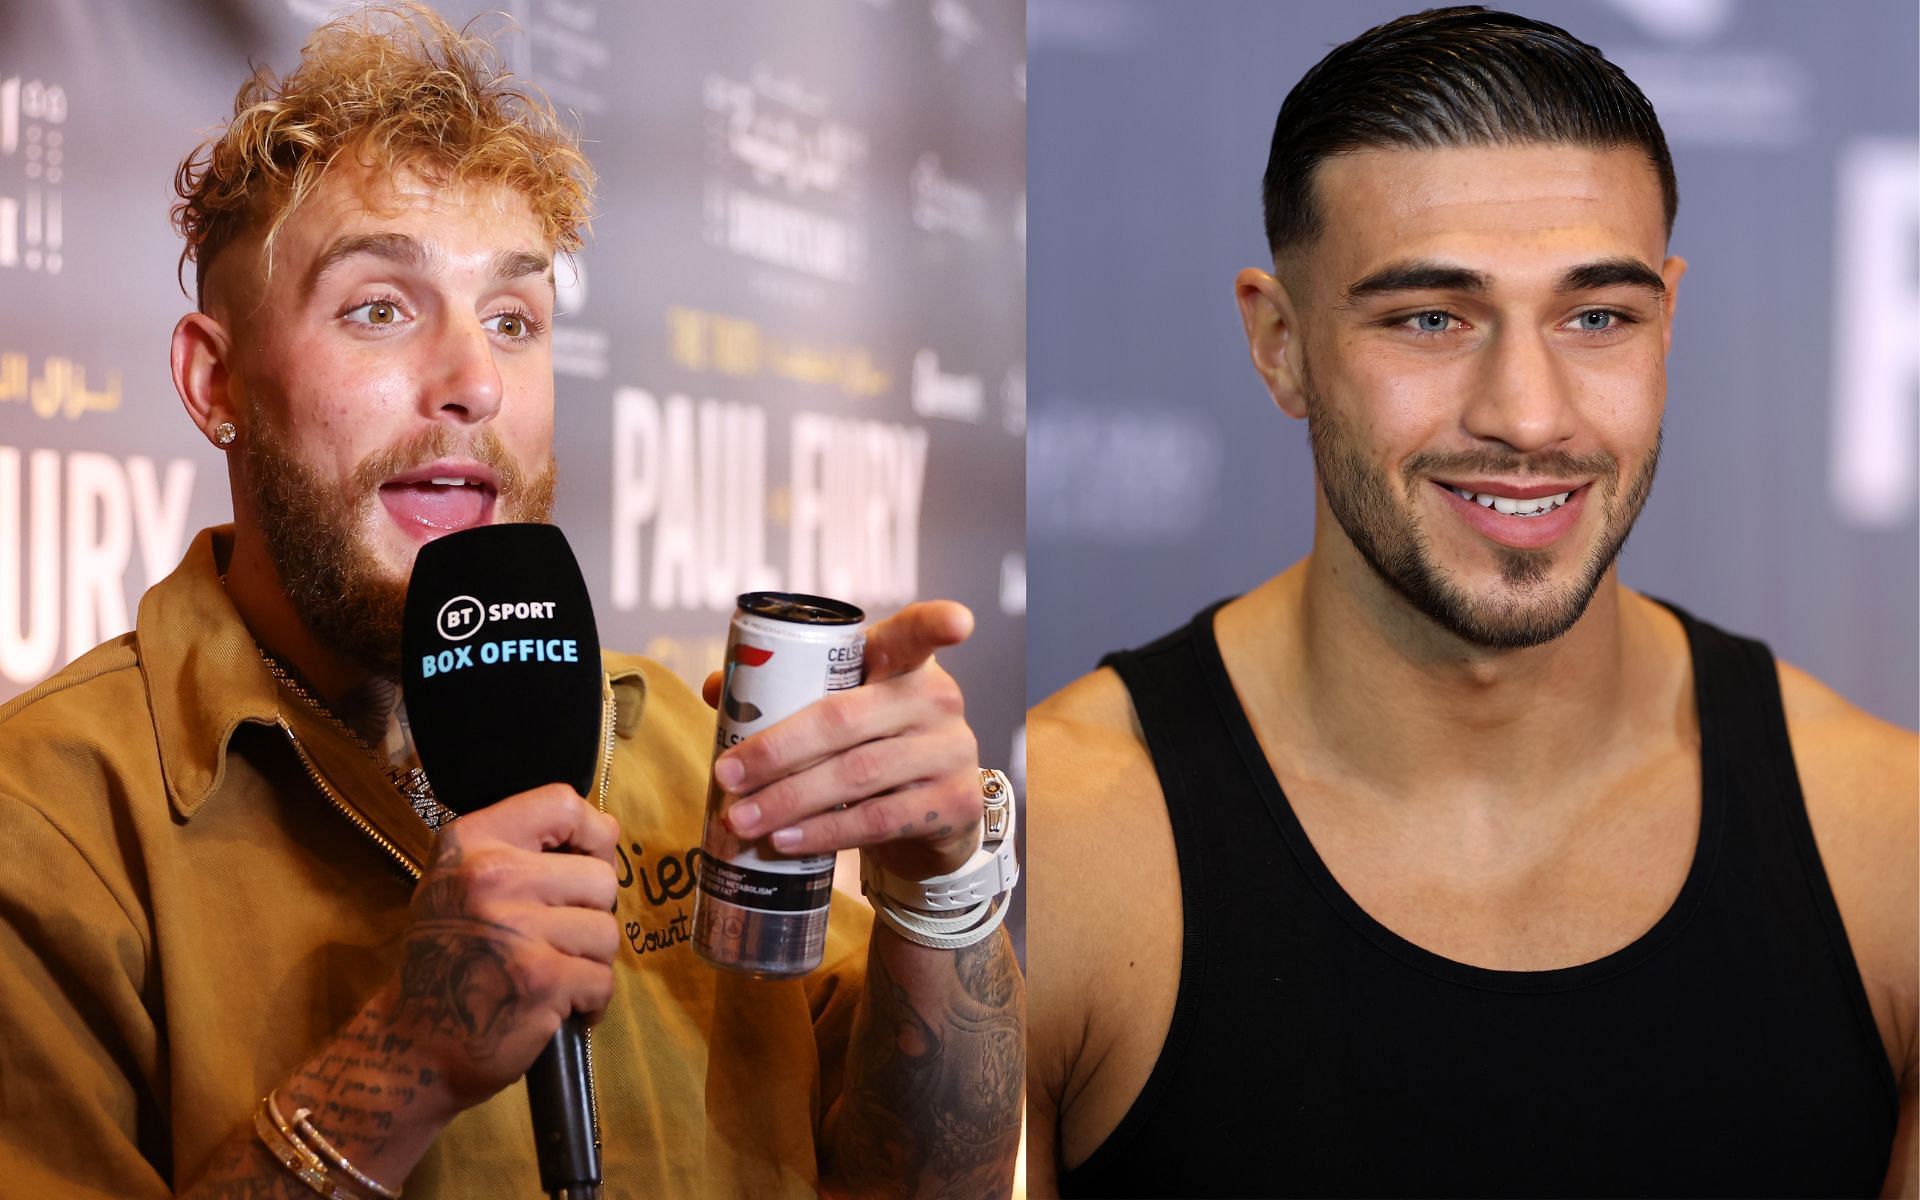 Jake Paul (left) and Tommy Fury (right). [via Getty Images]